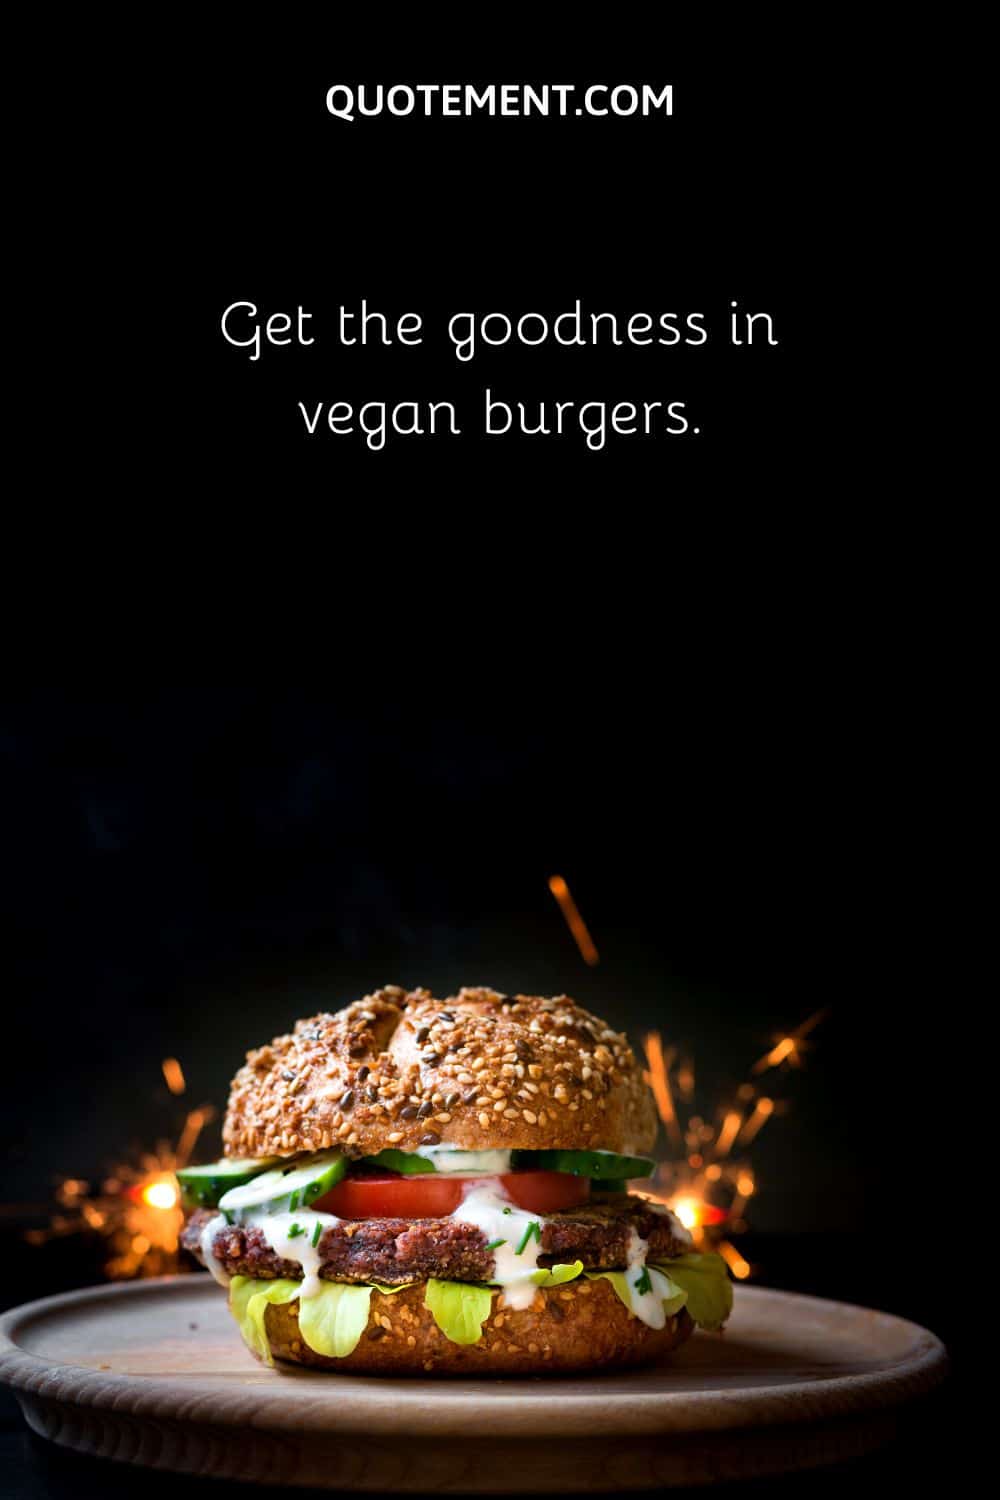 Get the goodness in vegan burgers.